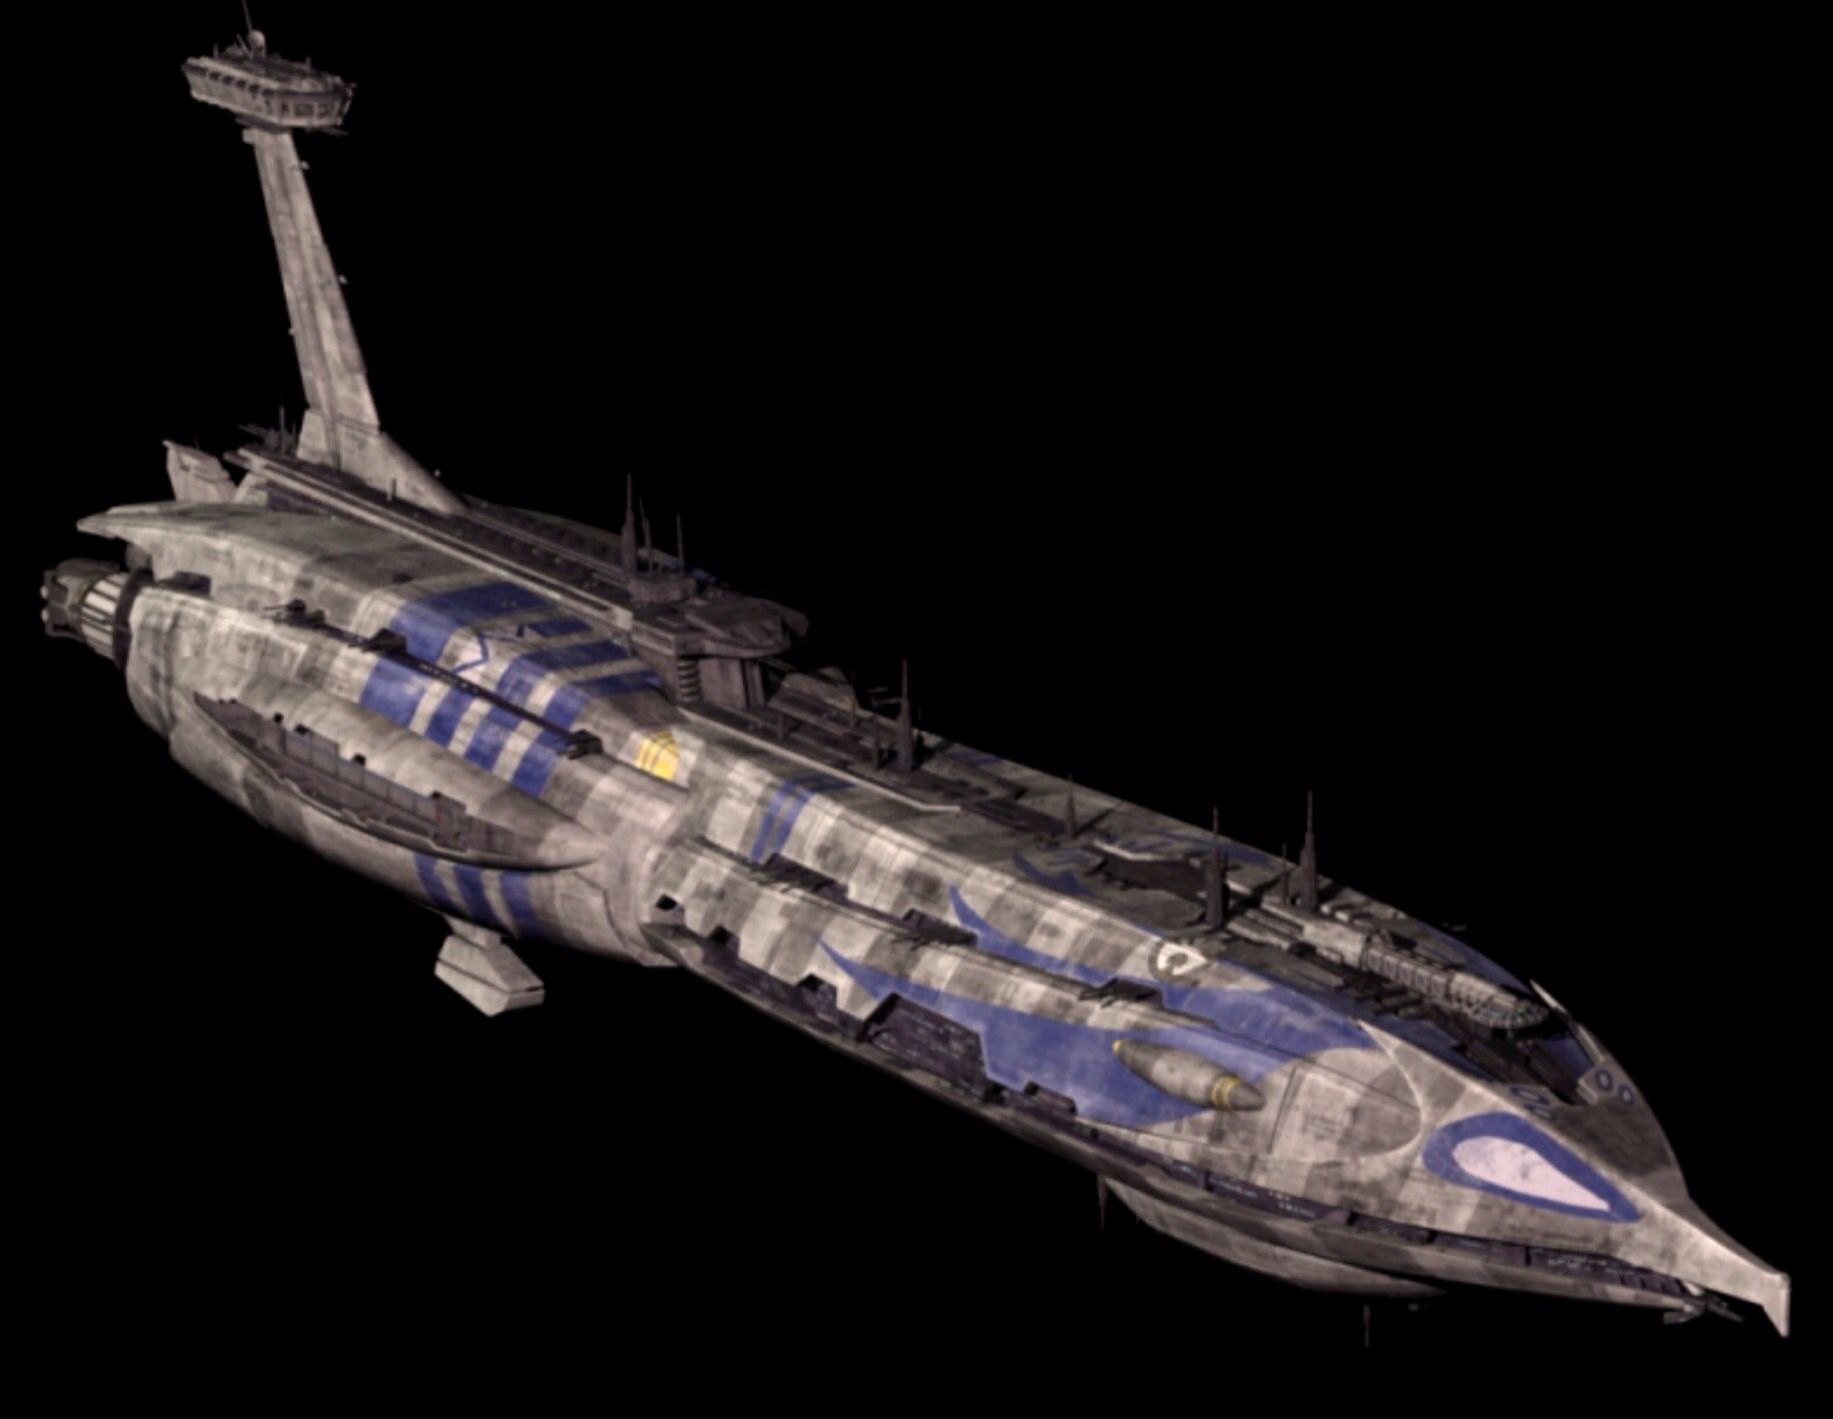 Trade Federation's Invisible Hand. Star wars ships, Star wars spaceships, Star wars artwork